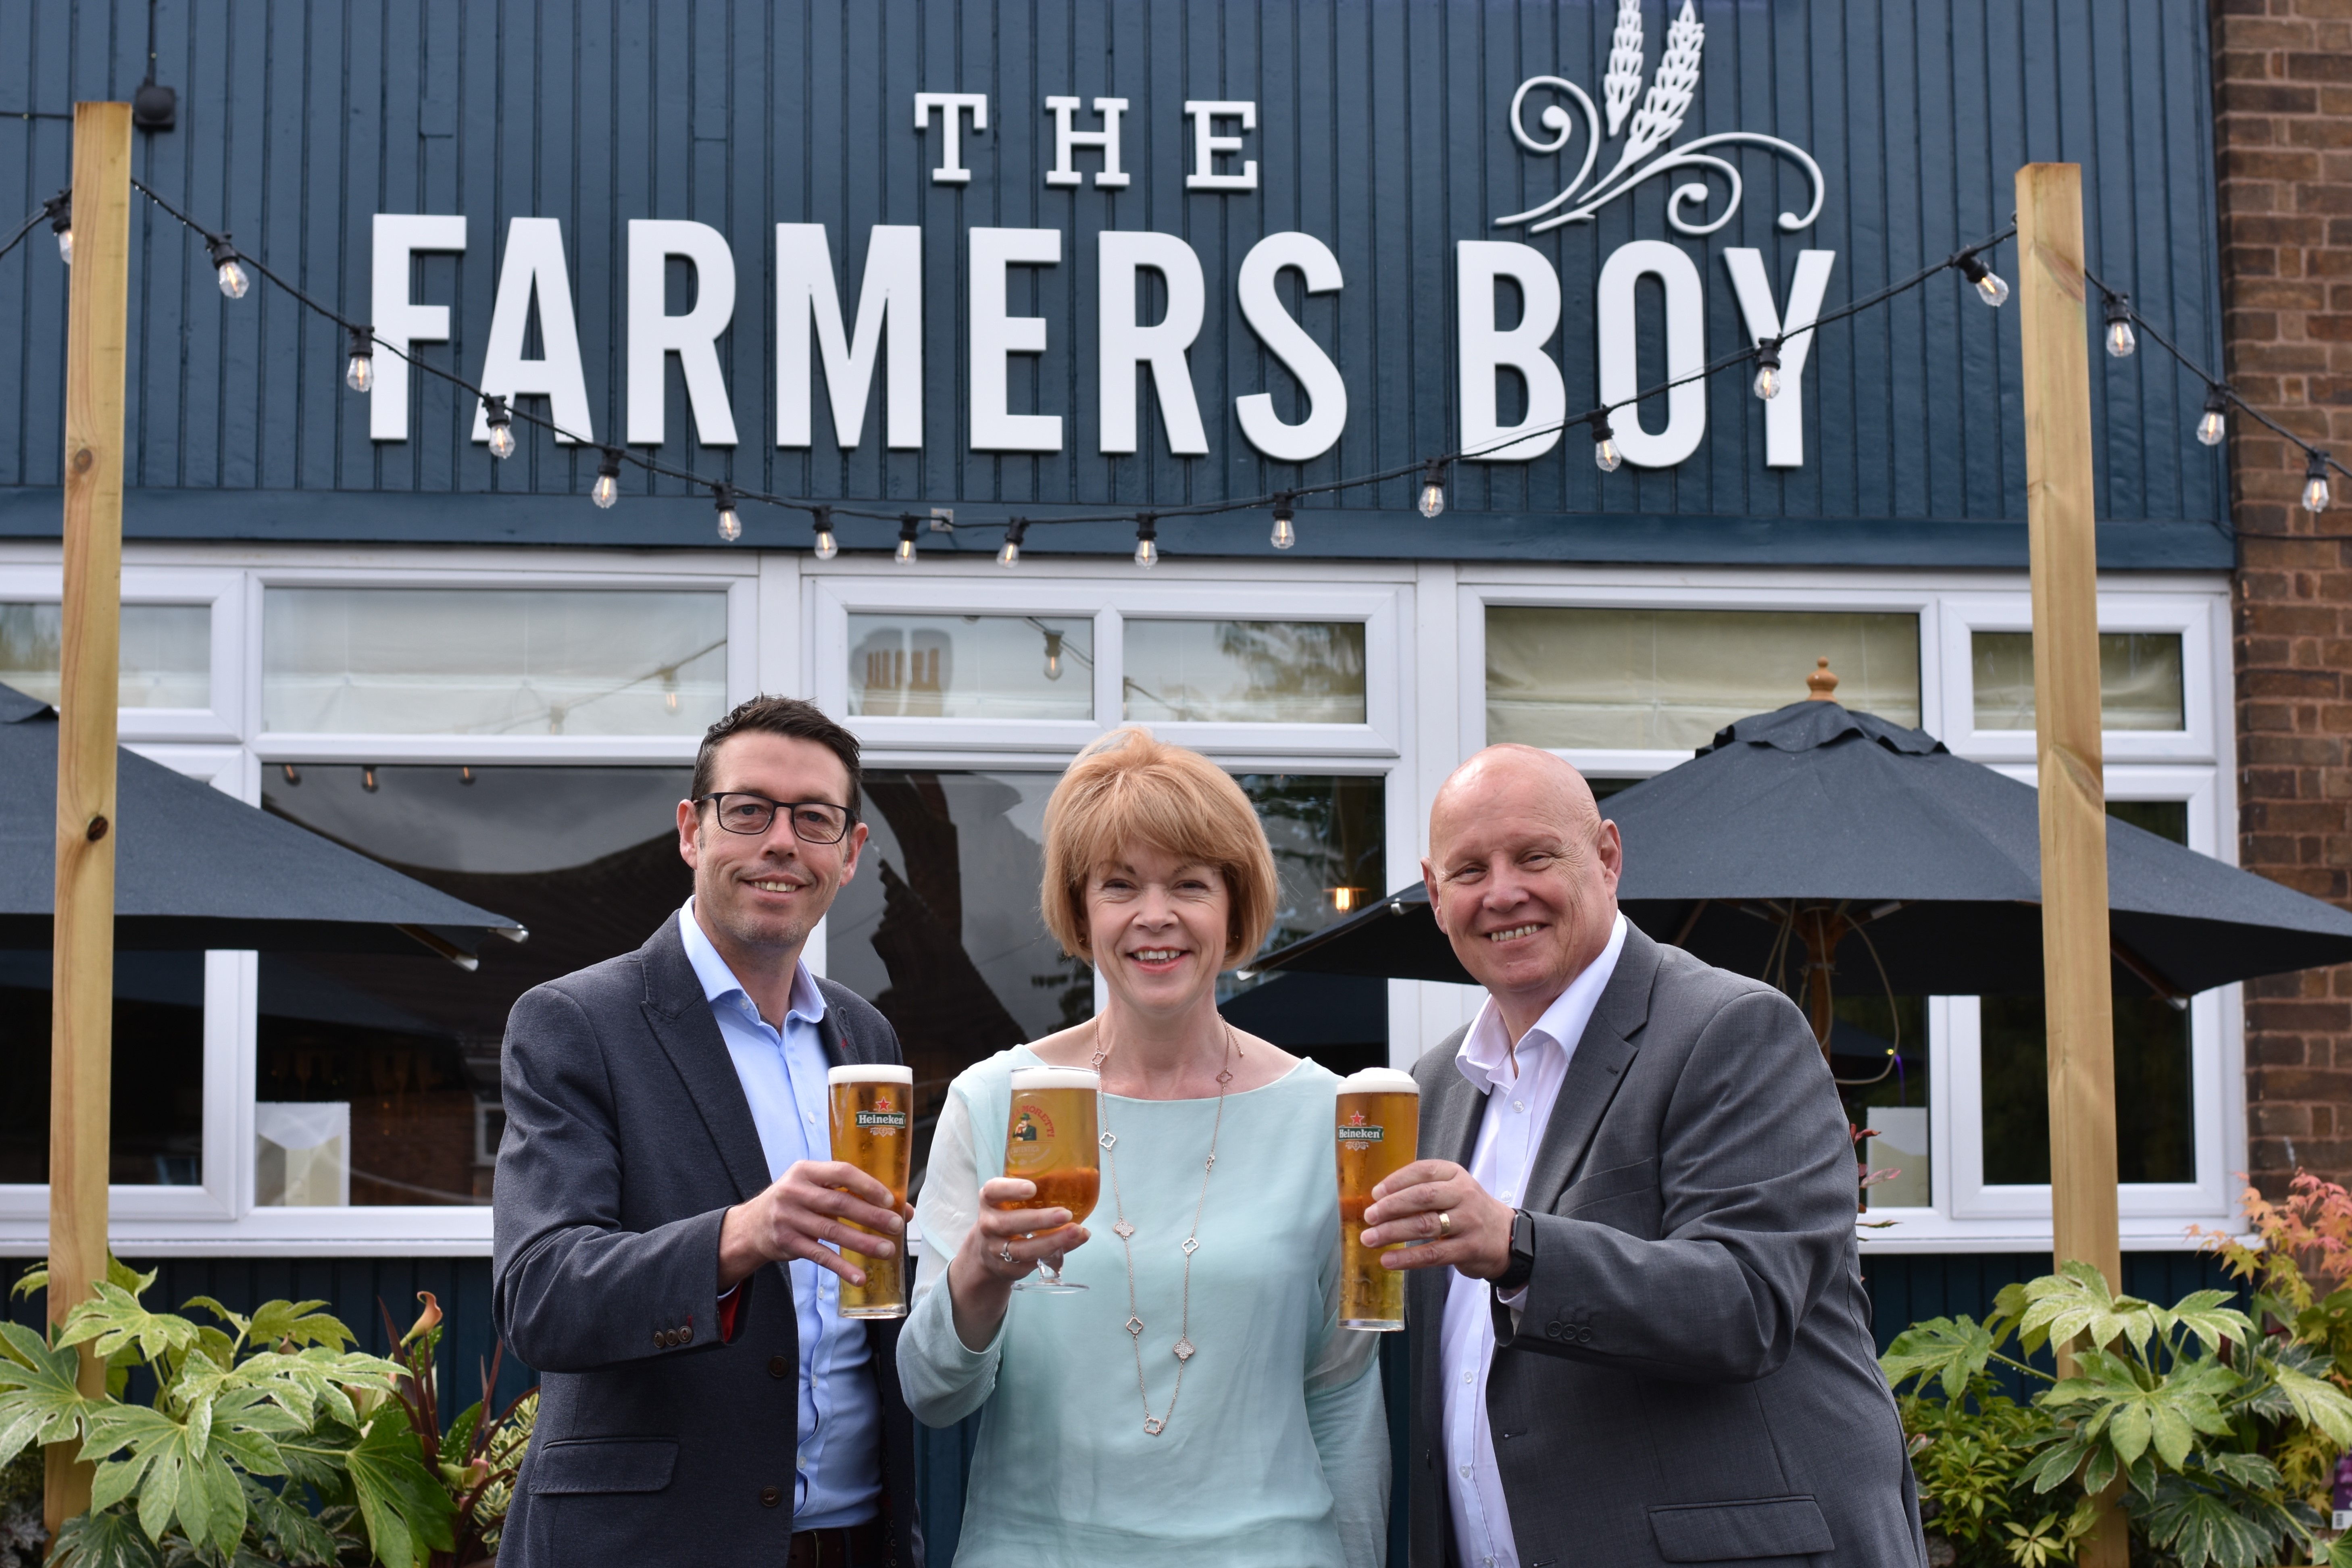 Celebrating the re-opening of the Farmers Boy in Rushall